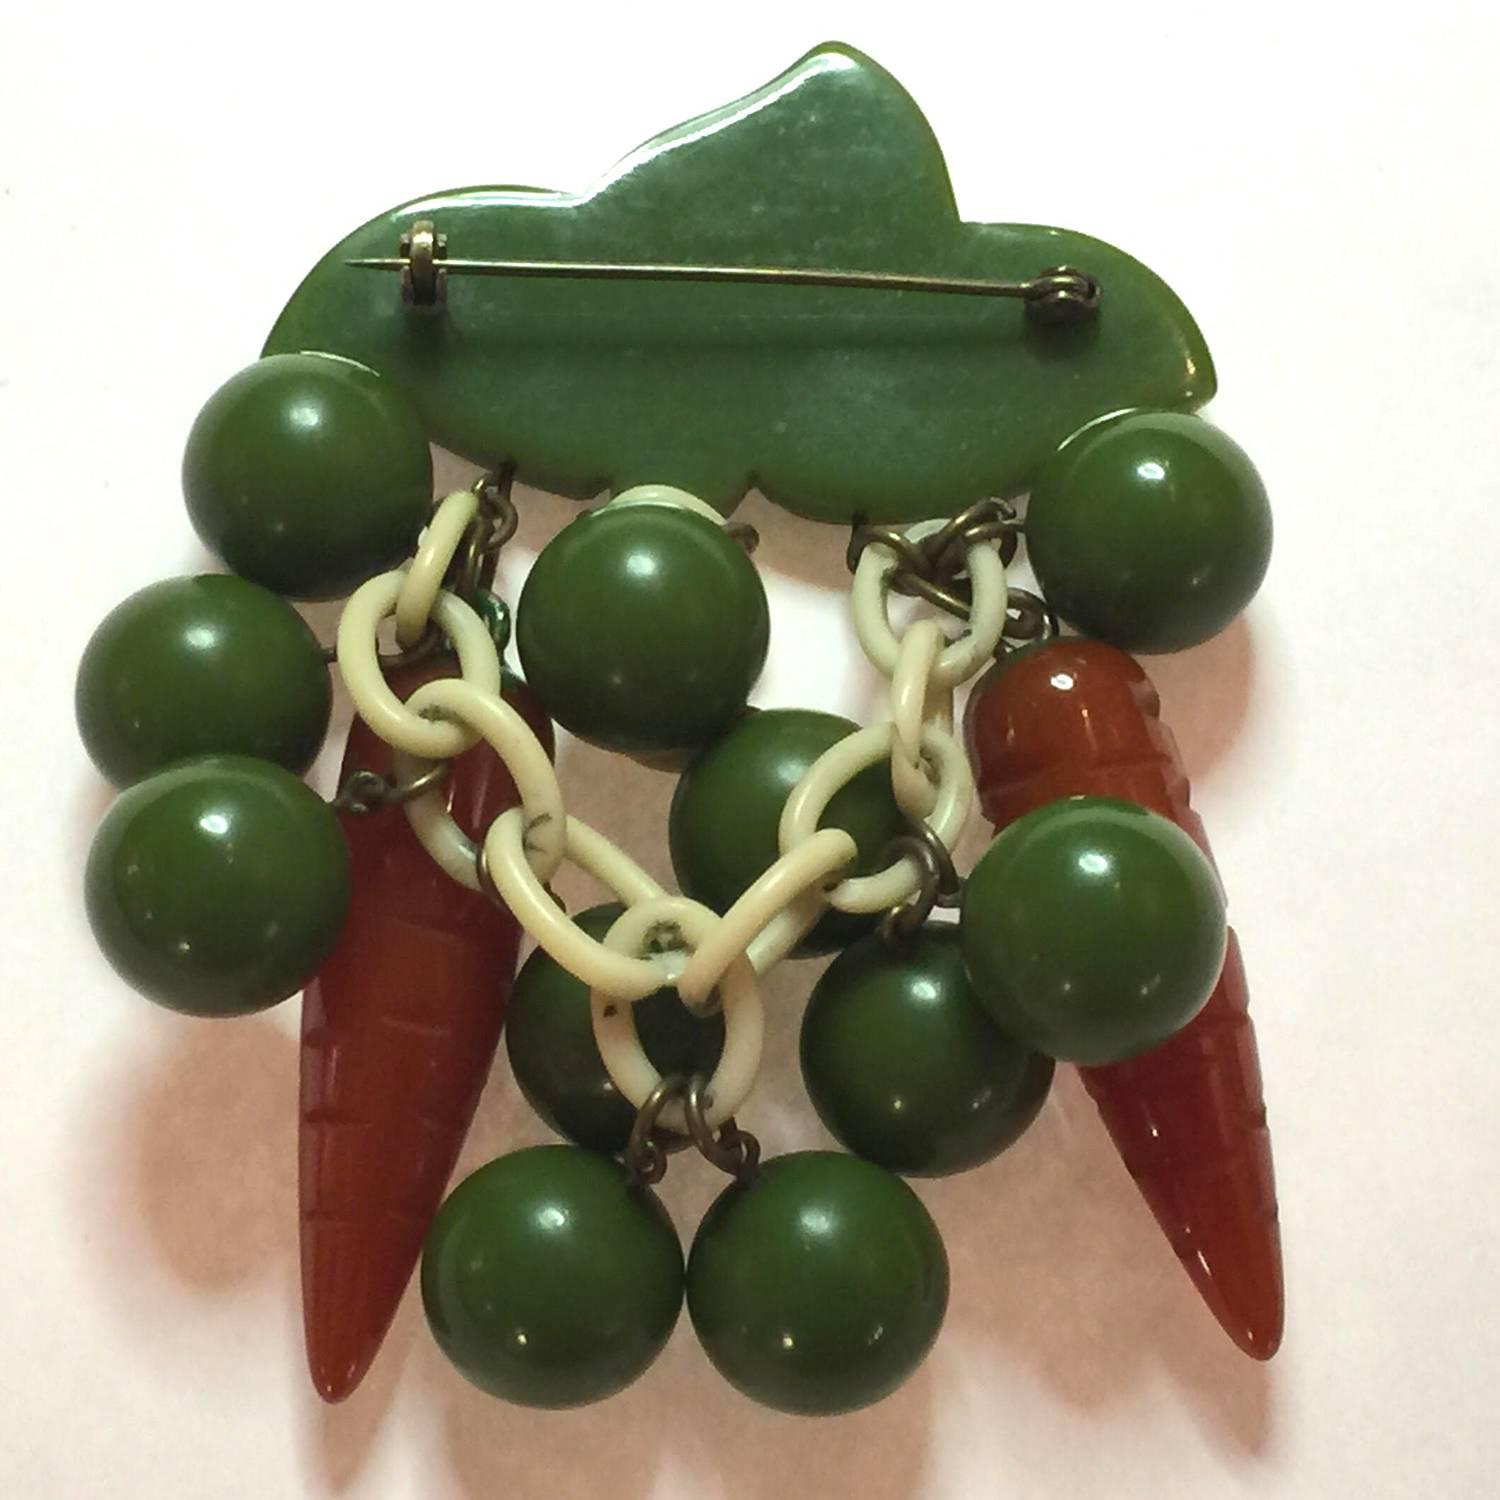 An amazingly humorous bit of bakelite magic, this 1930s Amusing Bakelite Peas and Carrots Figural Brooch/Pin sums up the essence of whimsy which so many admirers love about figural bakelite jewelry. A RARE vegetable pin, with this especially funny